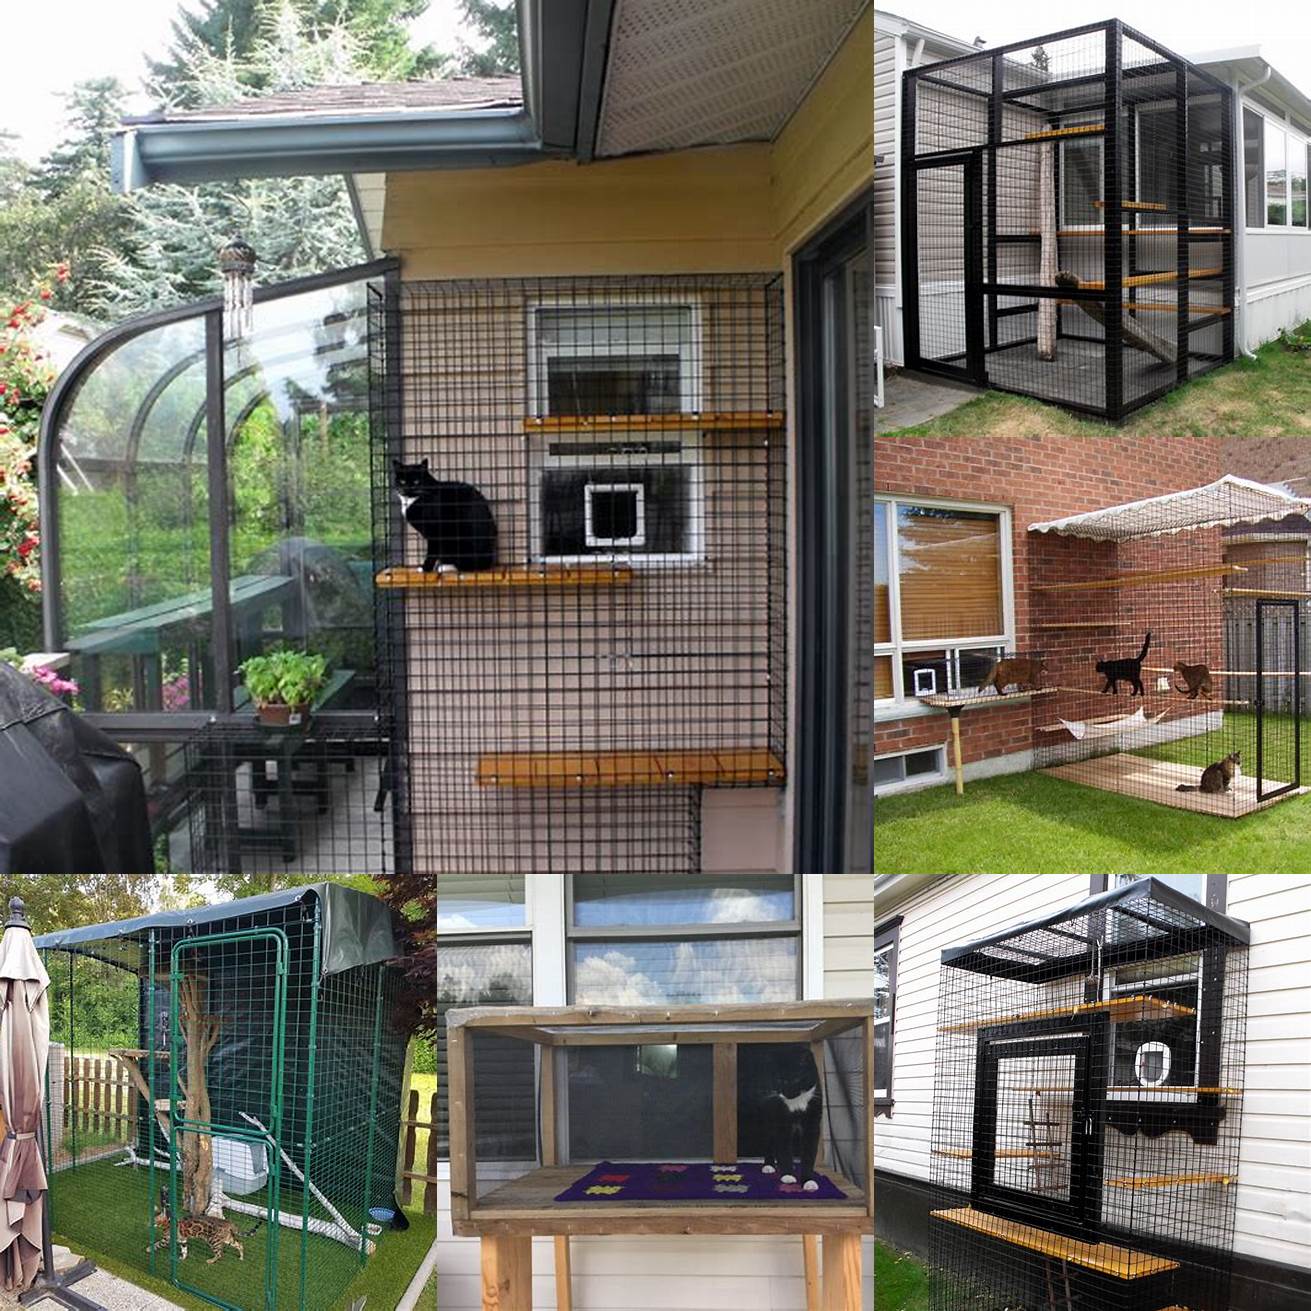 Accessibility Make sure the enclosure is easy to access for both you and your cat especially if you have an older or disabled pet